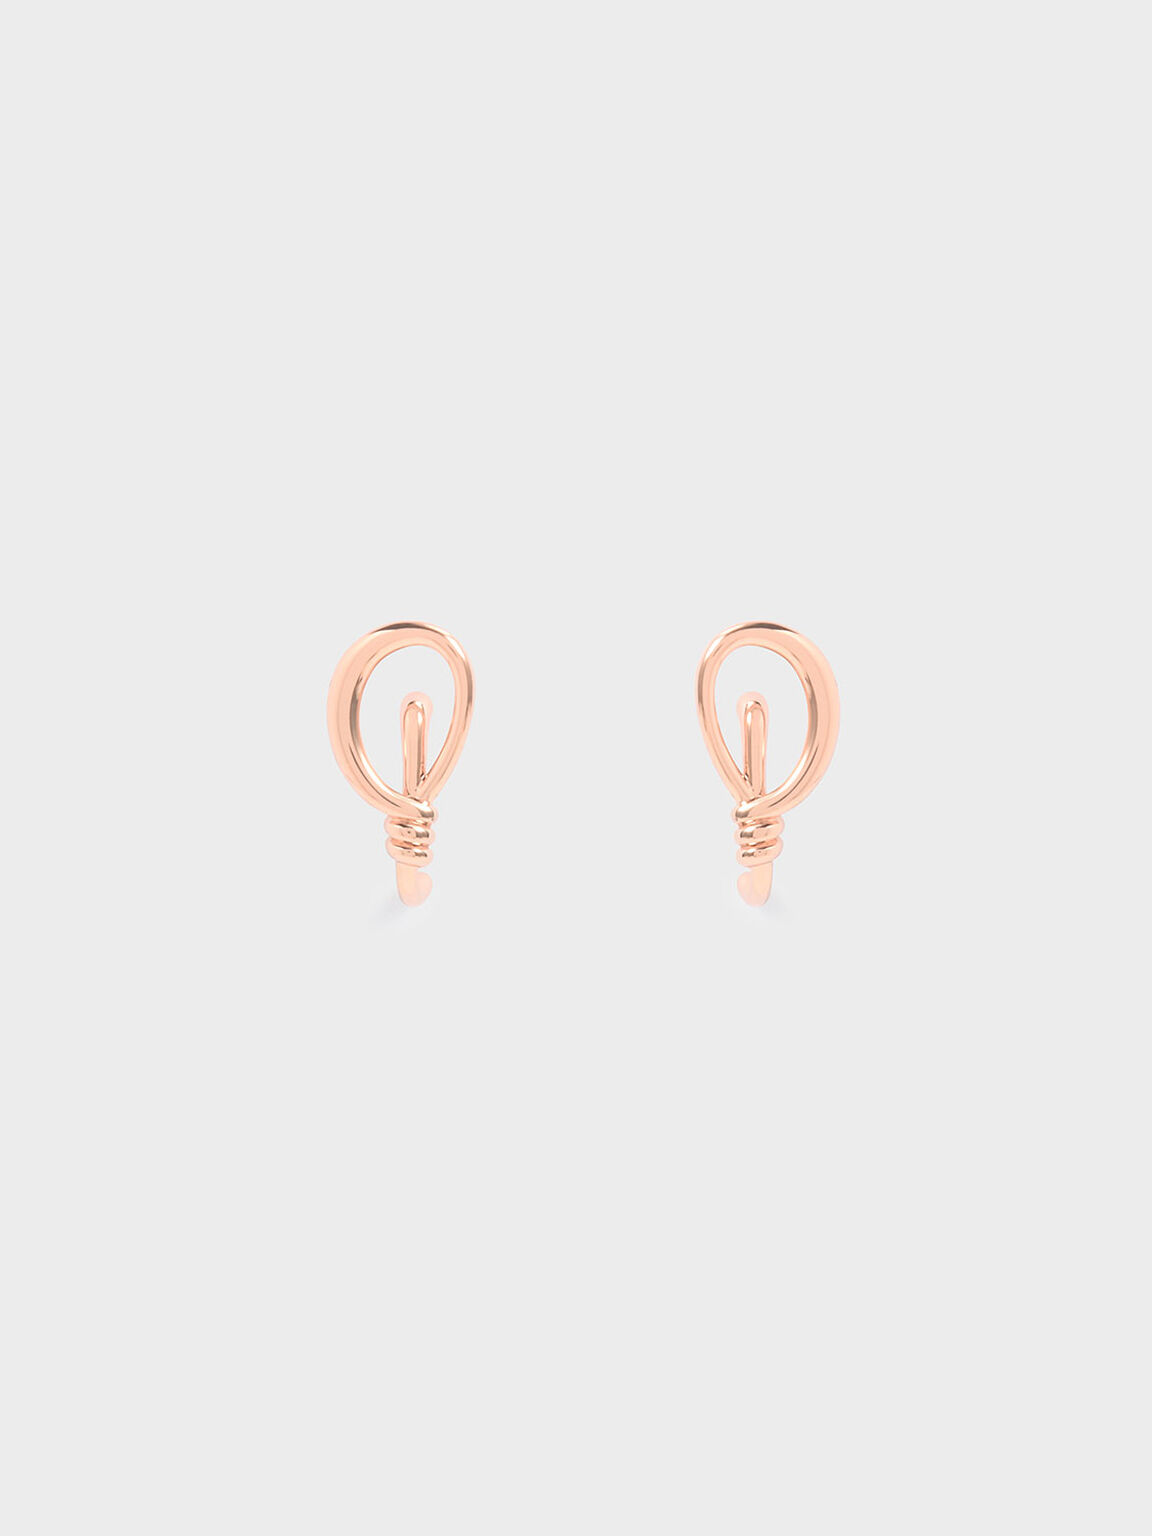 Knotted Stud Earrings, Rose Gold, hi-res